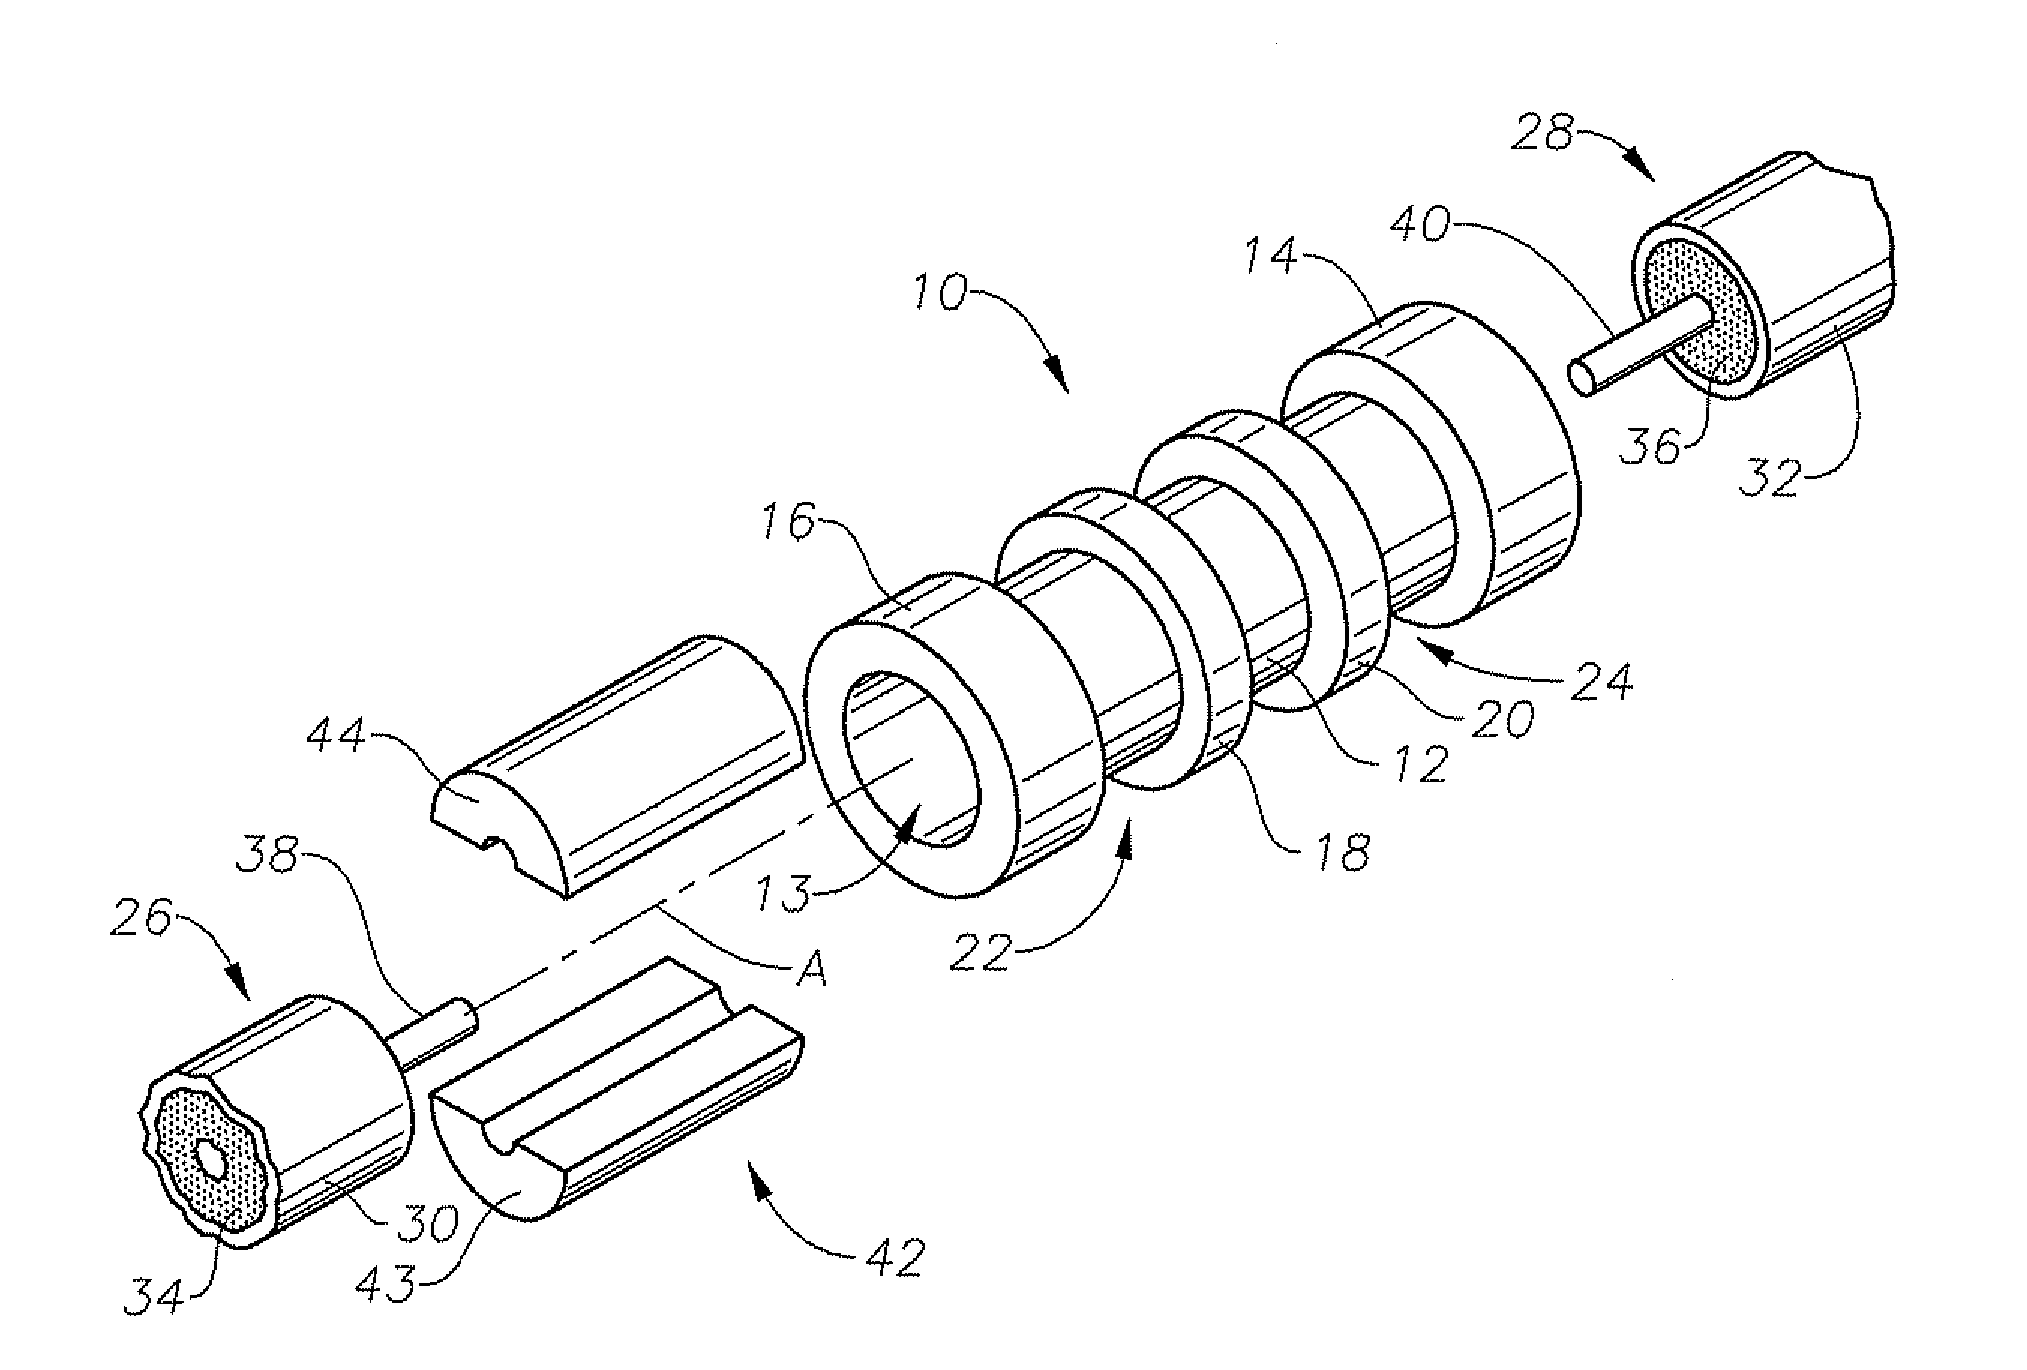 Mineral insulated metal sheathed cable connector and method of forming the connector